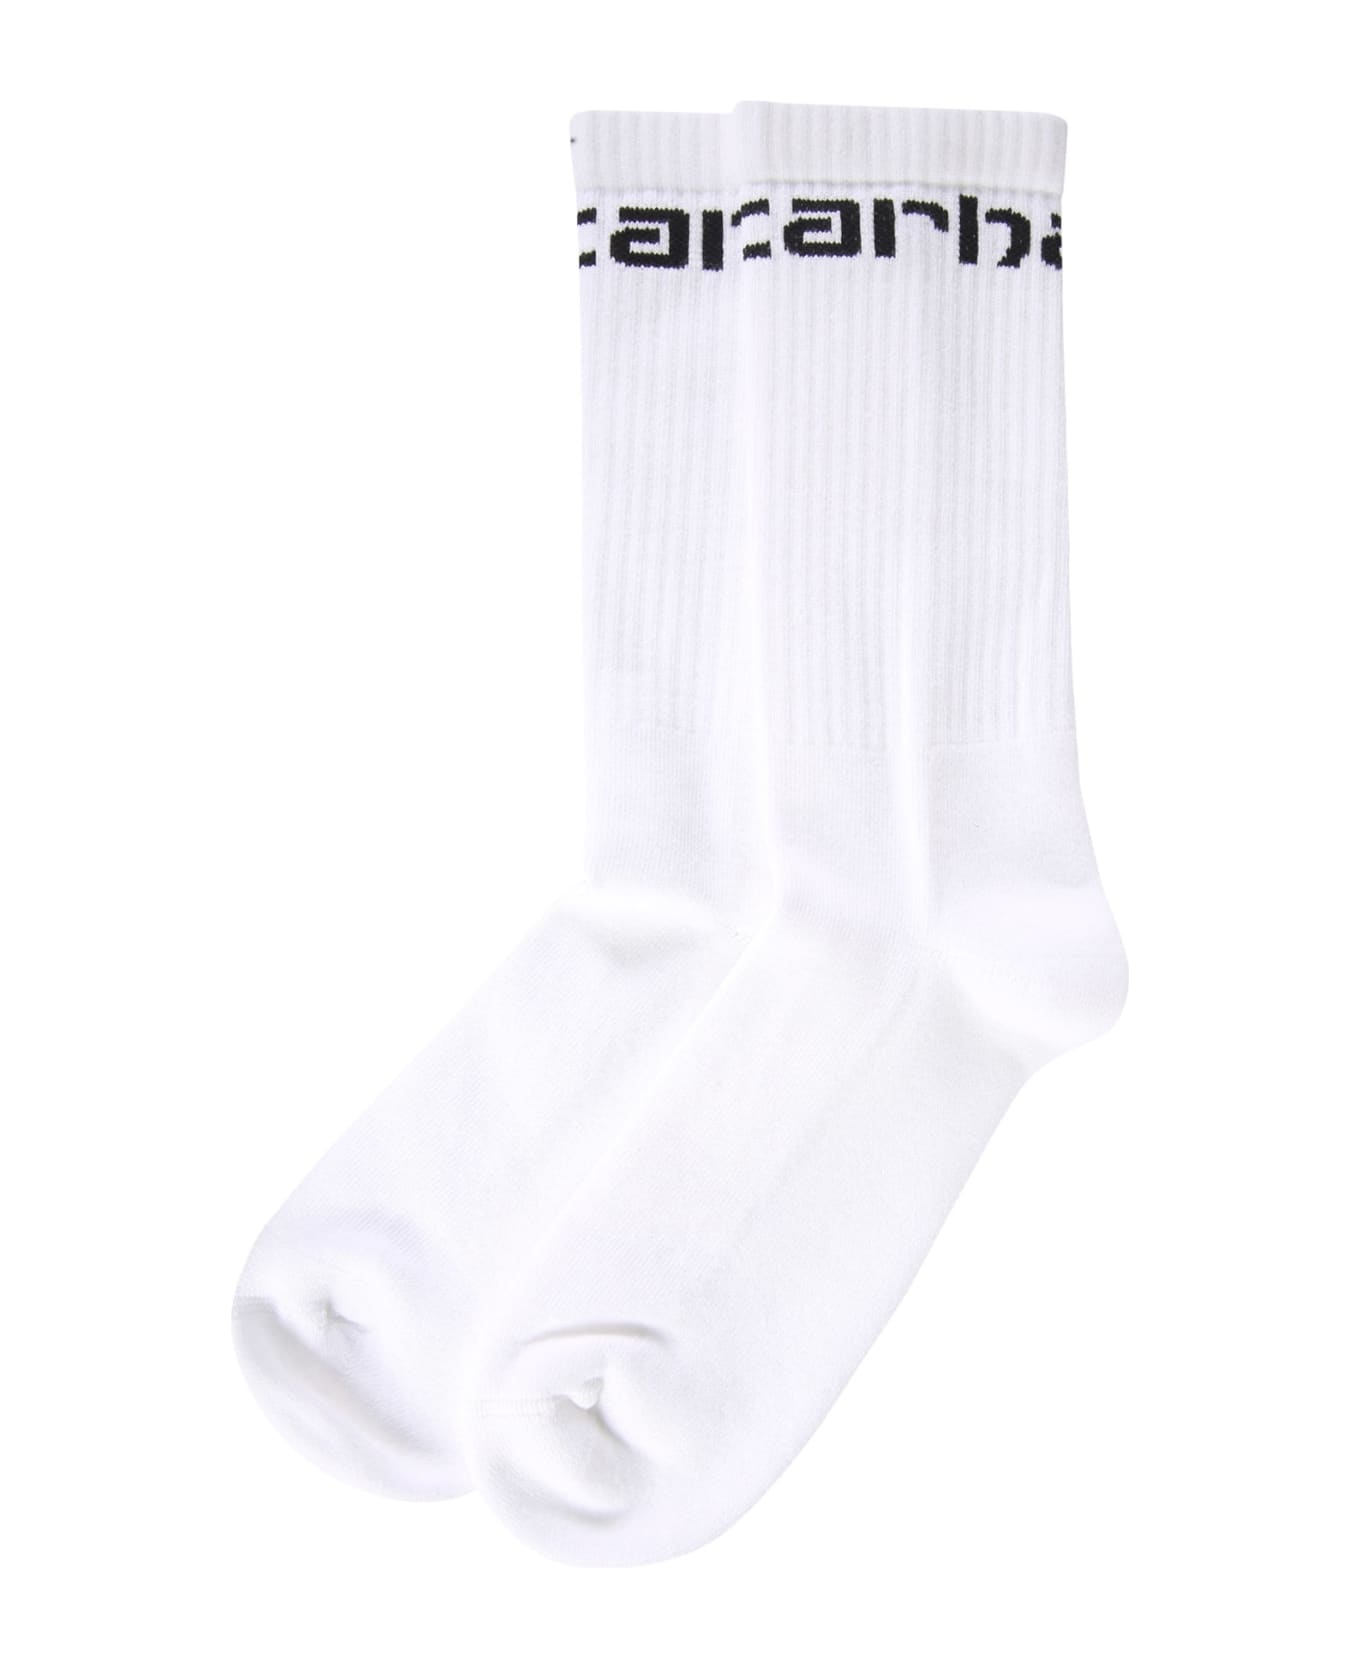 Carhartt Socks With Logo Embroidered - White 靴下